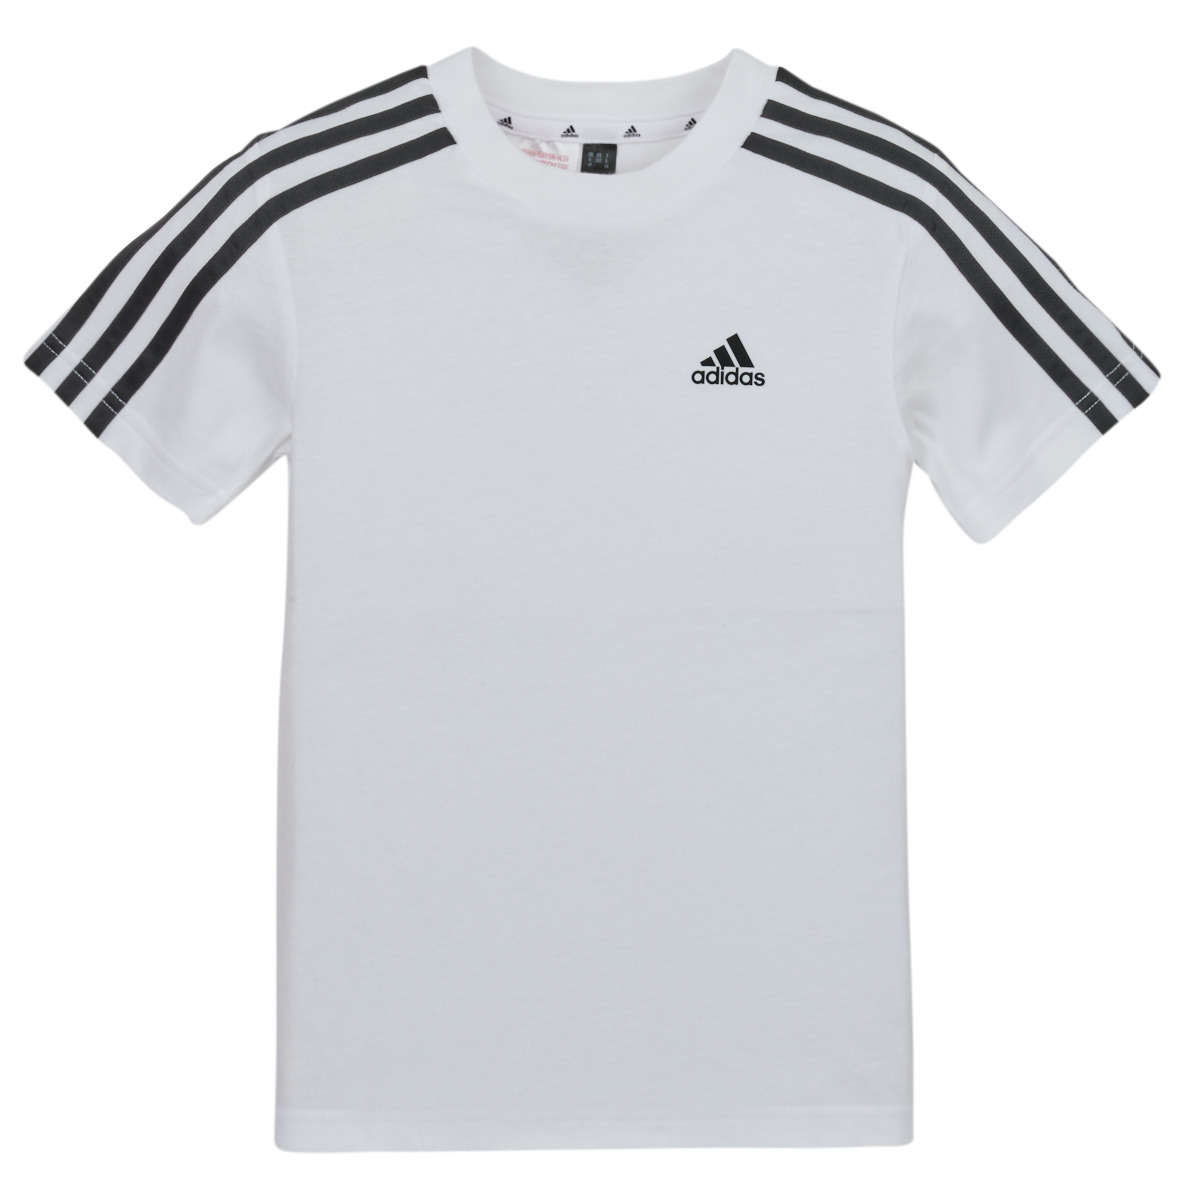 Short-sleeved CO - Rubbersole.co.uk £ t-shirts - TEE ! LK with Delivery 3S Adidas Free Child White Clothing Sportswear